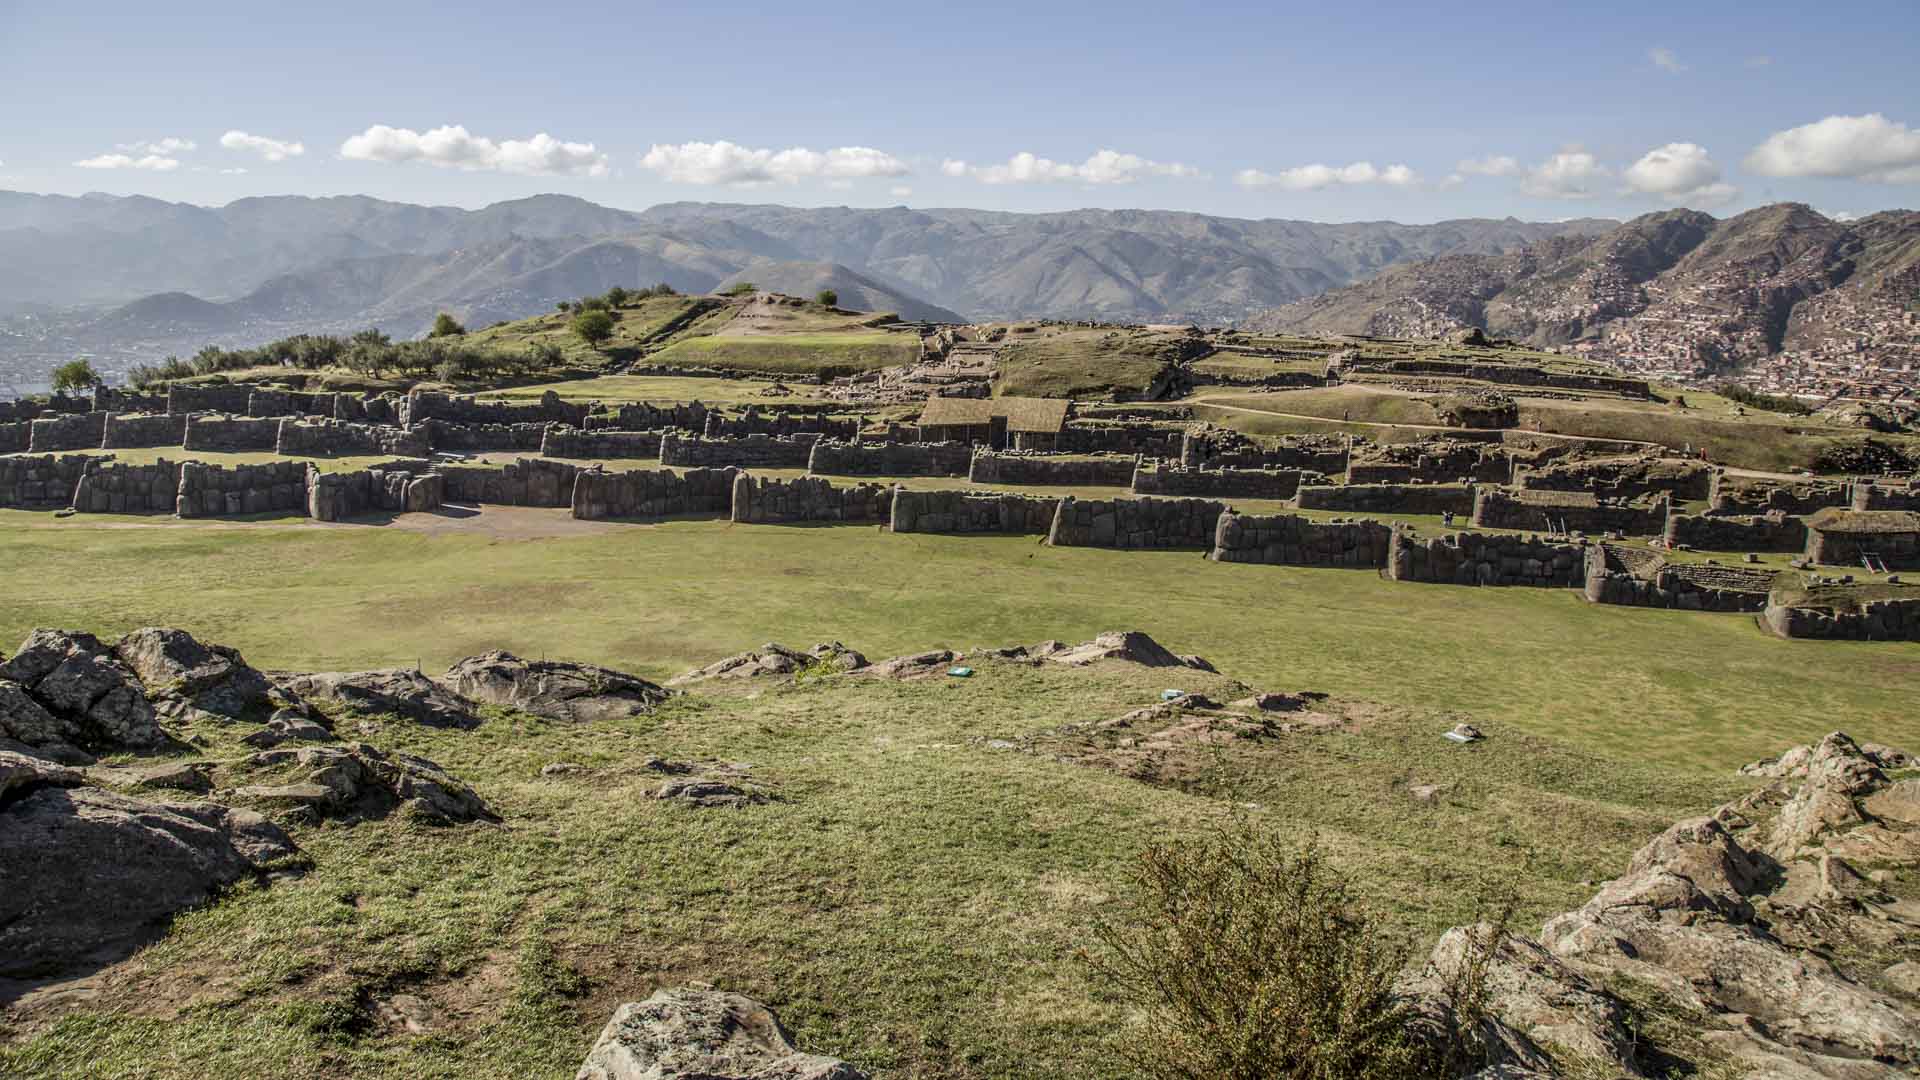 Even if generally described as a fortress on a hilltop, Sacsayhuaman is still hard to describe despite others impressions